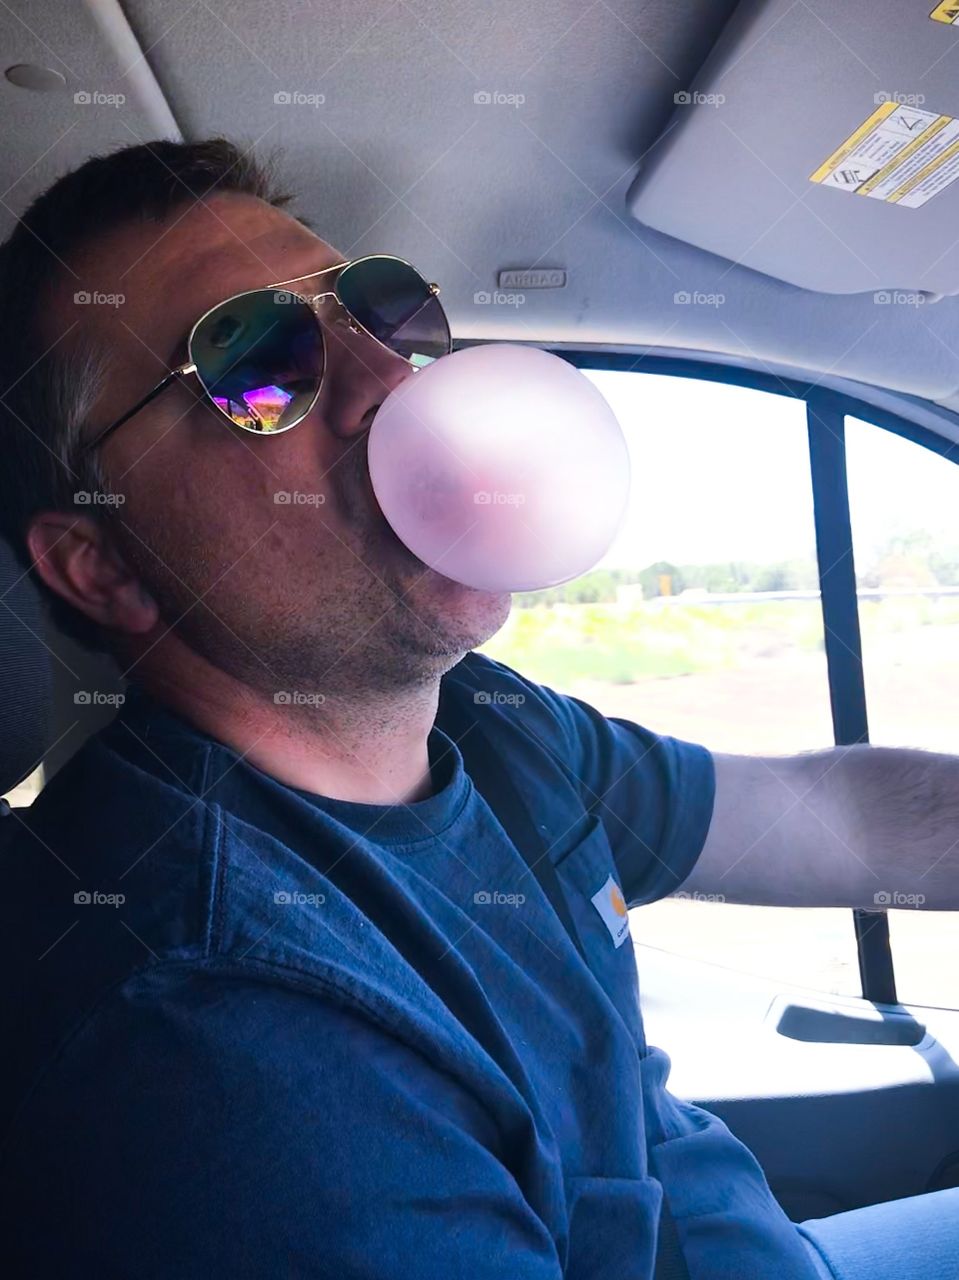   My dad blowing a bubble with Bubblicious  Bubblegum. He so cute:)